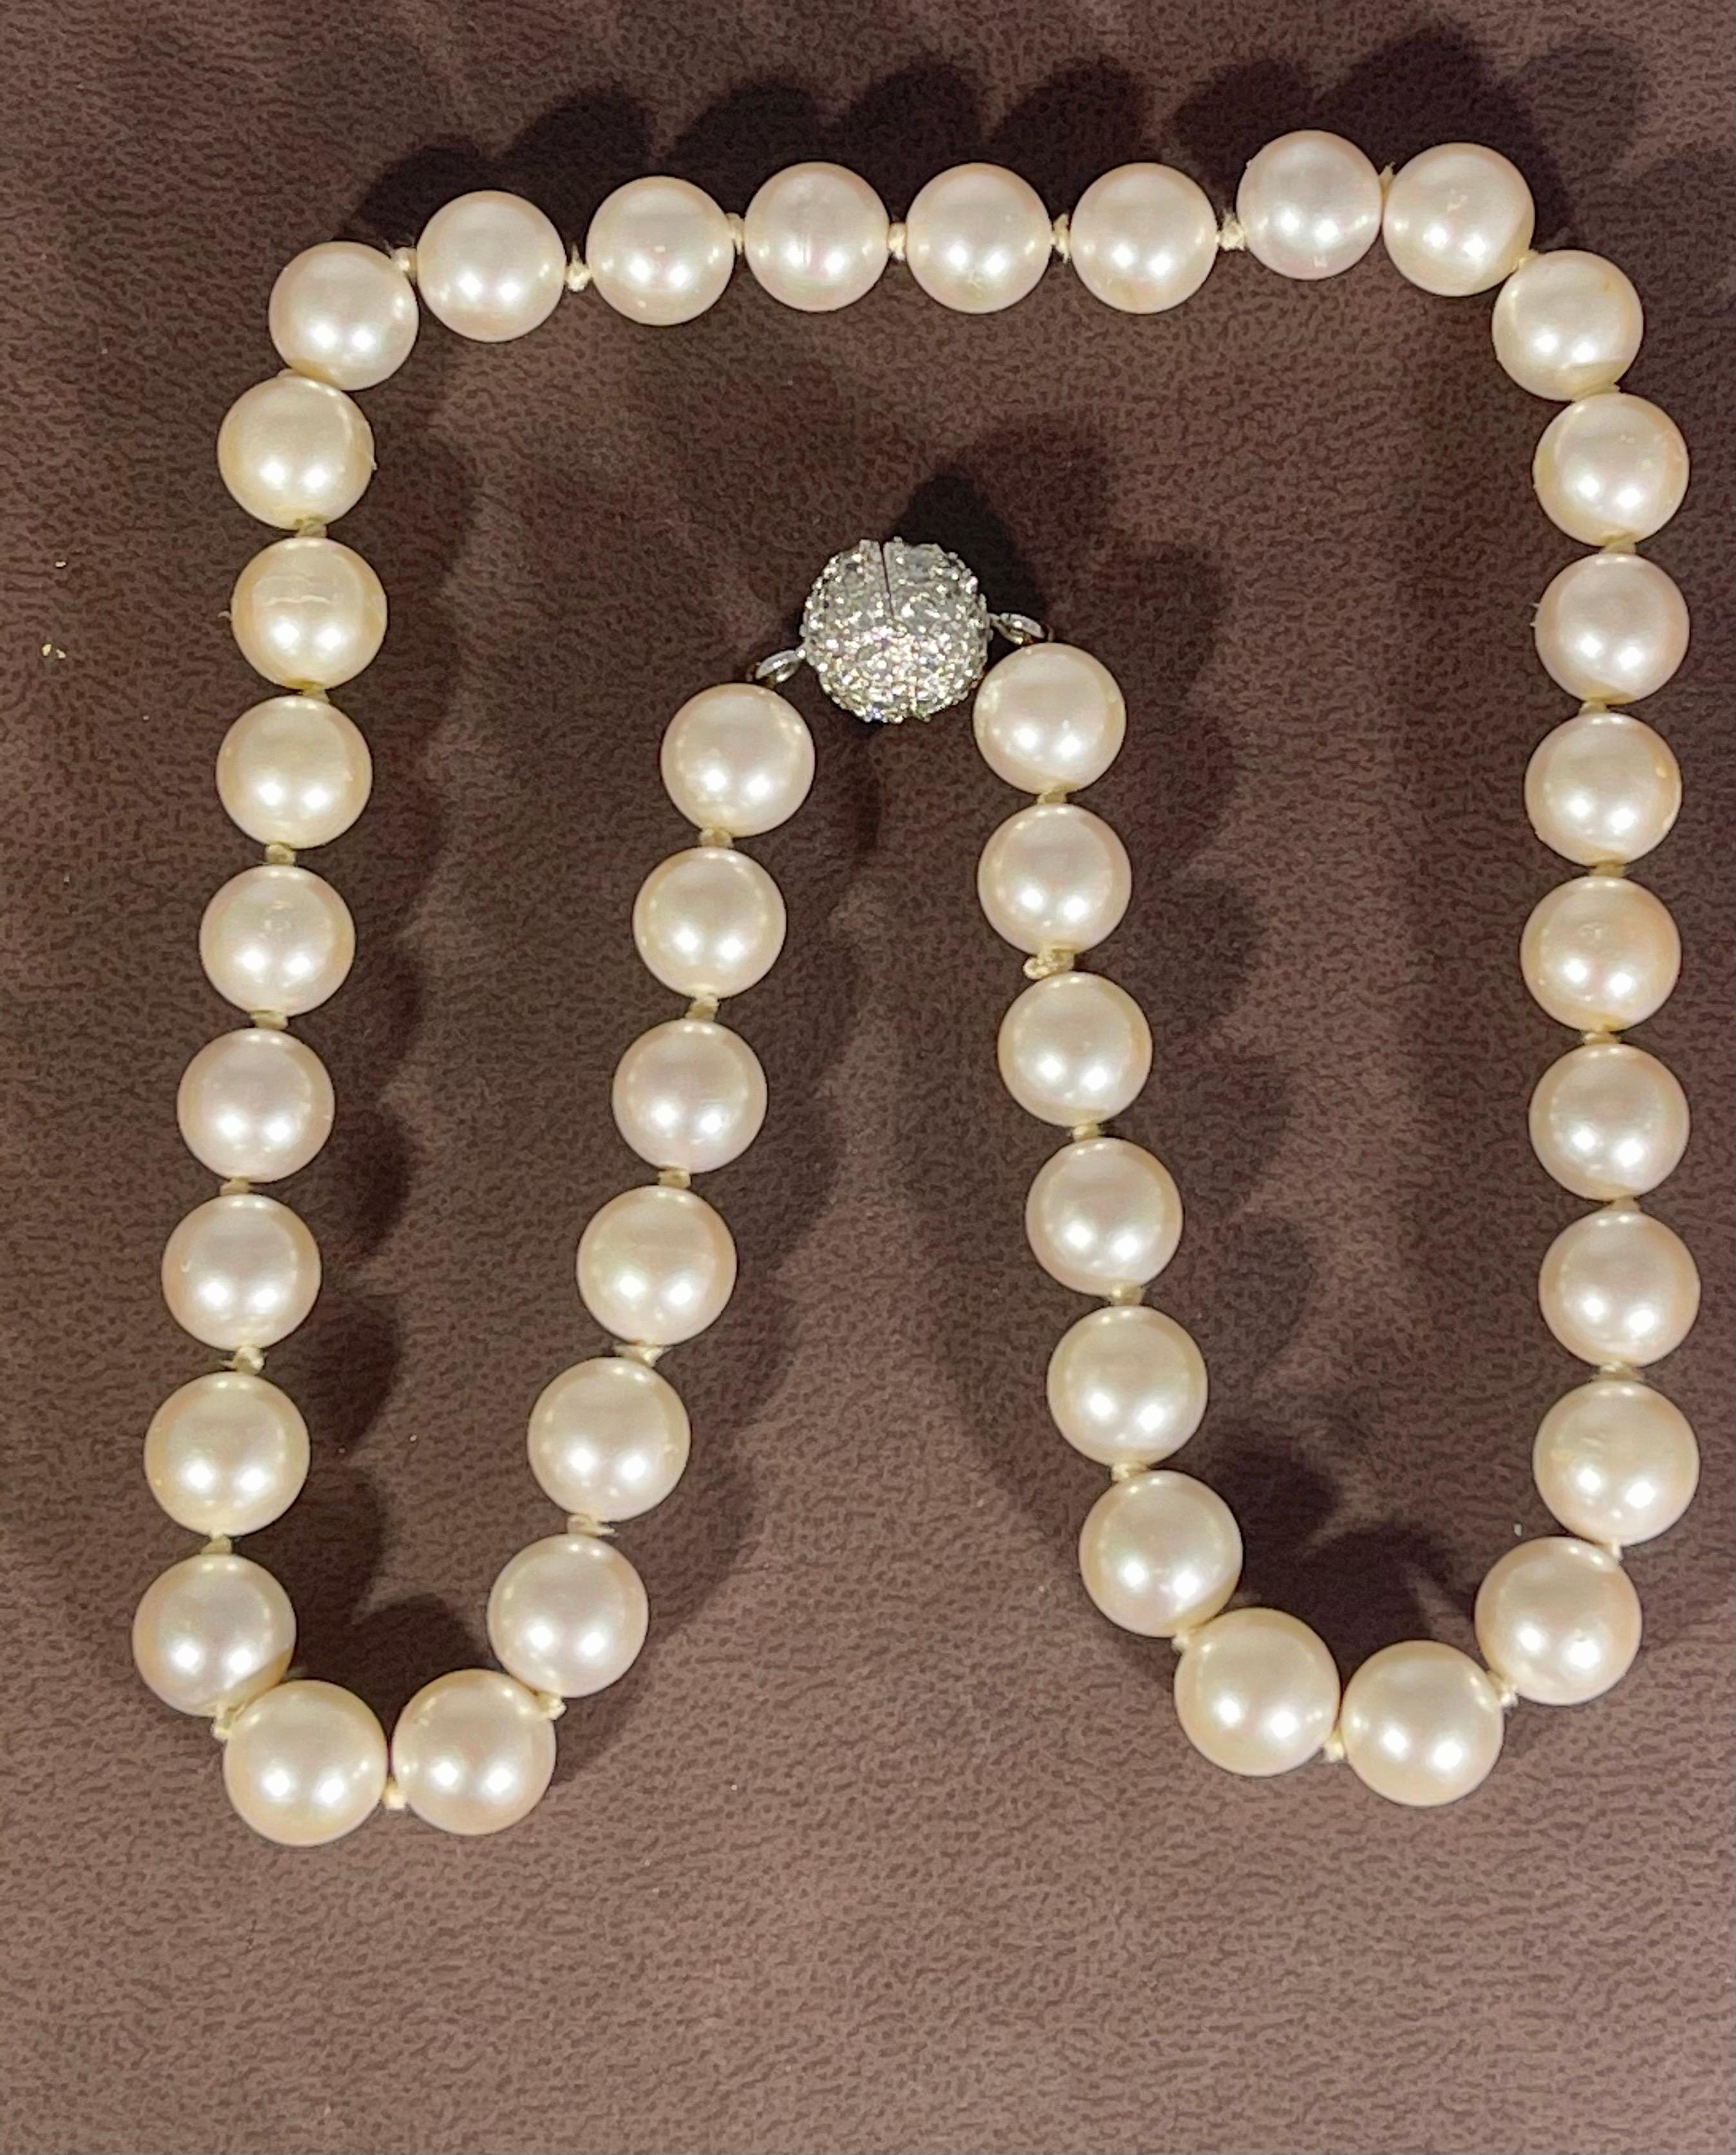 41 Round Akoya Pearls Strand Necklace Set in Metal Ball Clasp For Sale 4